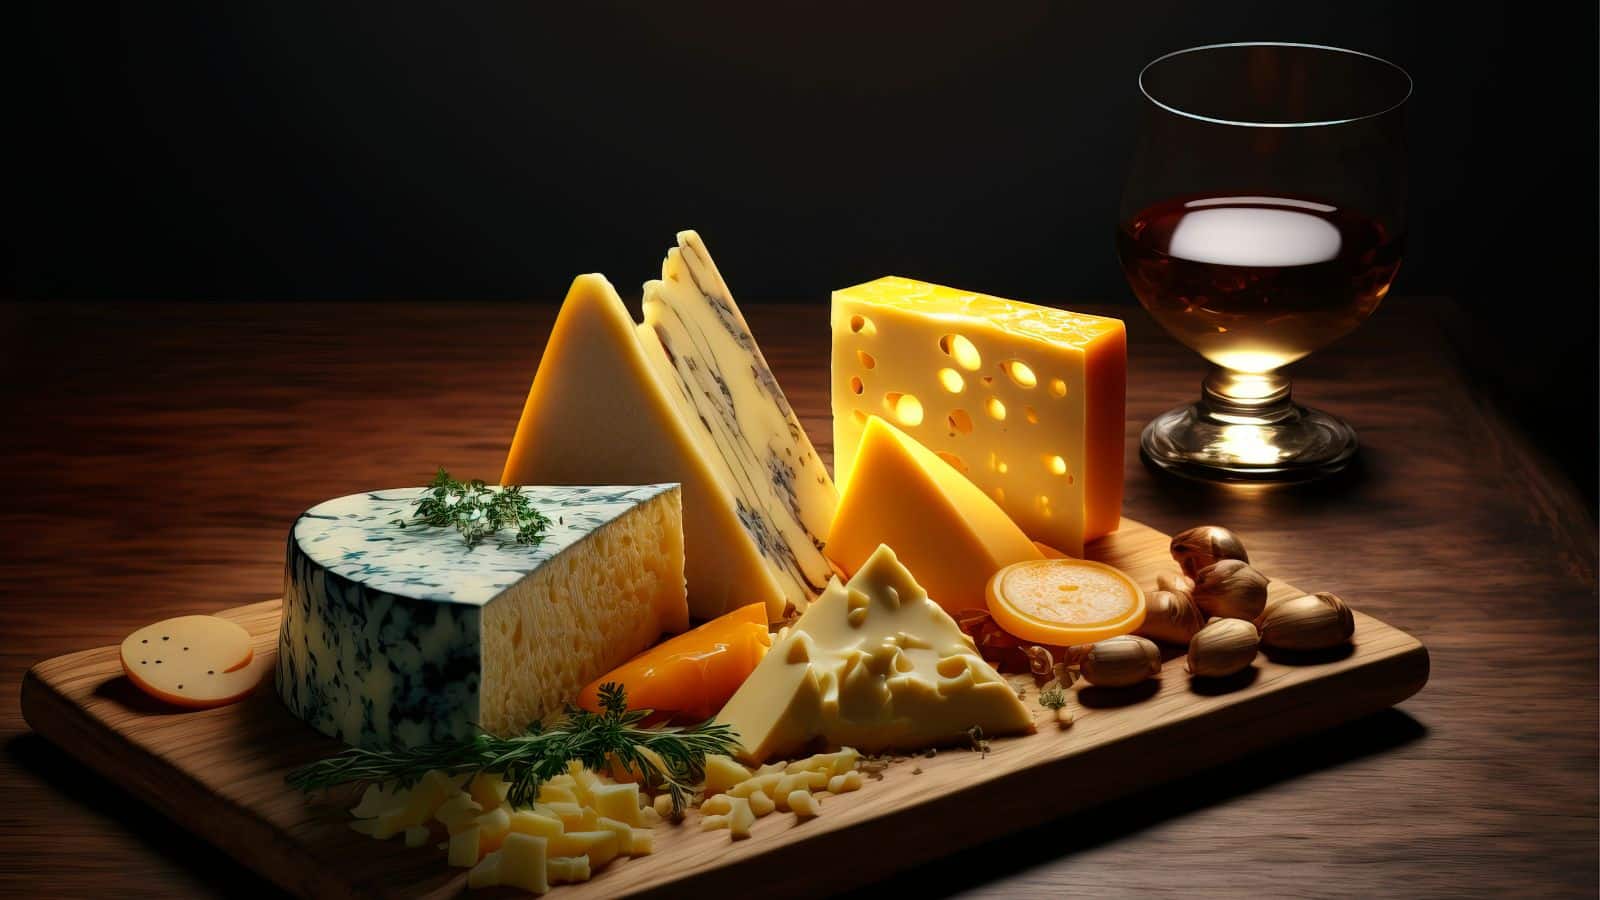 Food and Drink Pairing - Wine and Cheese